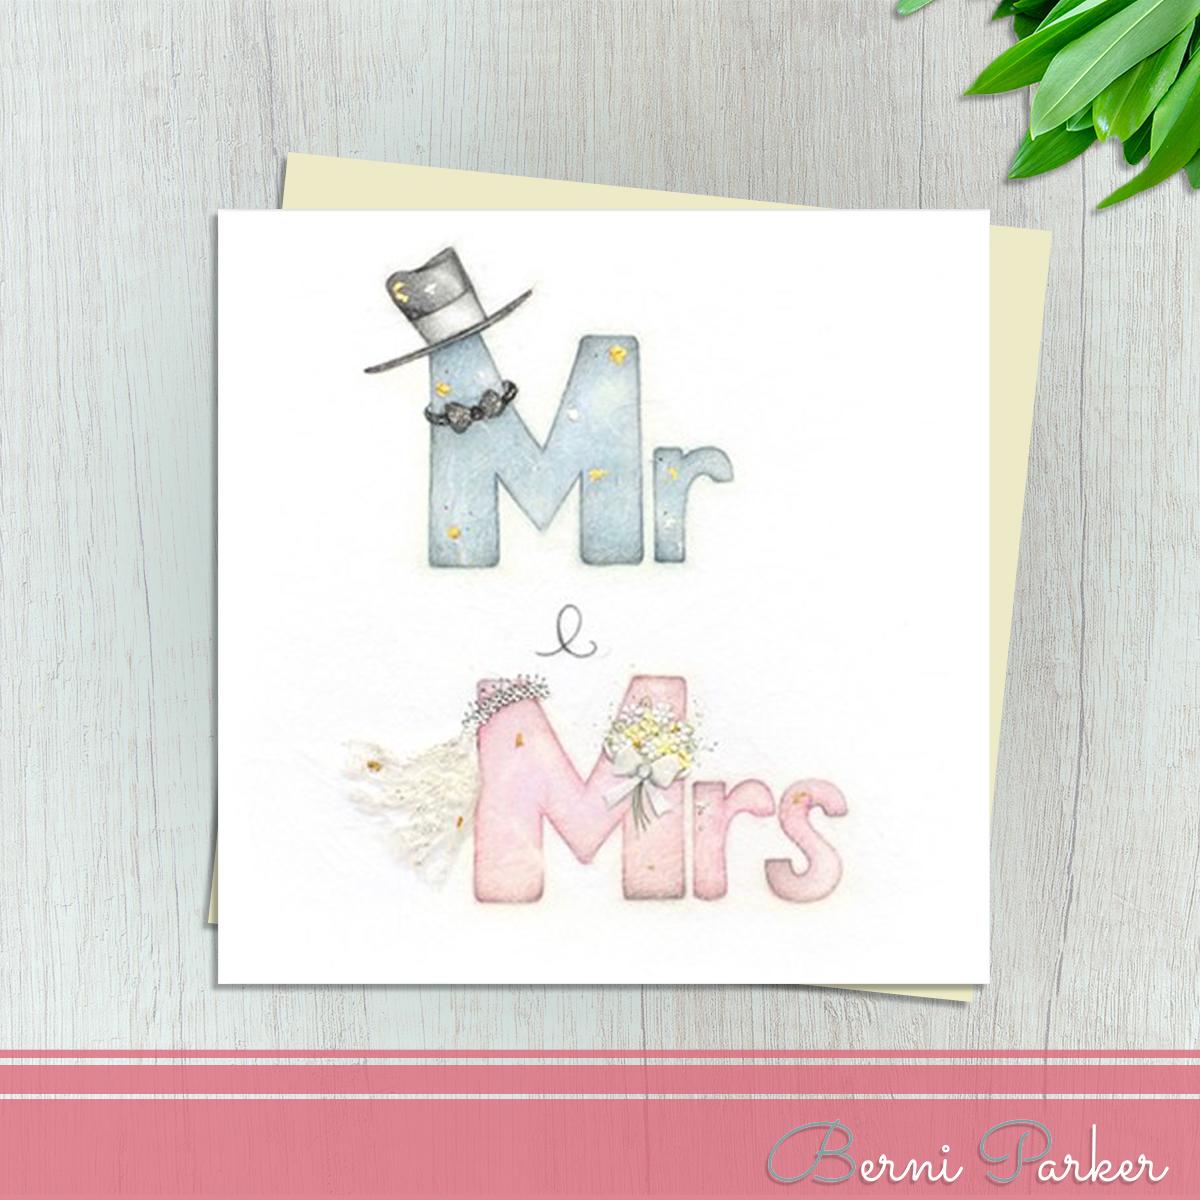 A Blue Mr With A Top Hat And Bow Tie and A Pink Mrs With A Veil And Bouquet Makes This Wedding Day Card So Pretty! With Gold And Silver Accents And Ivory Envelope